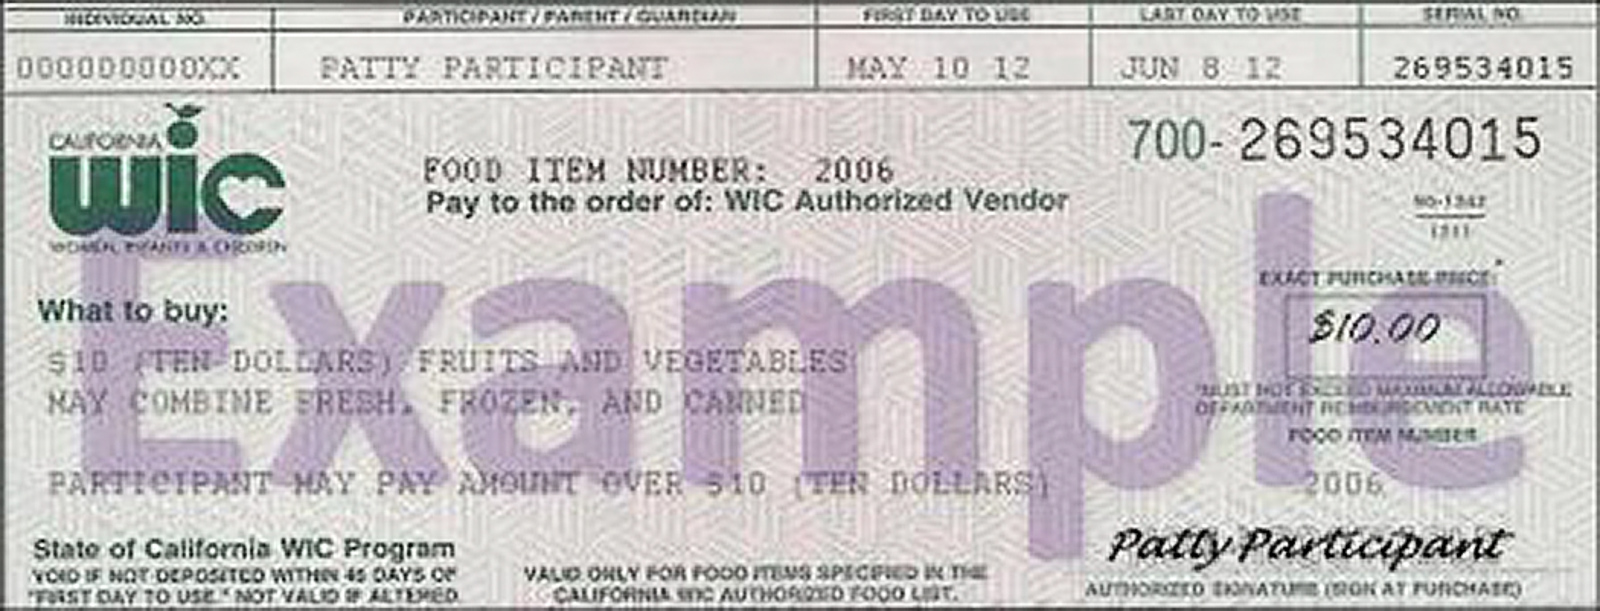 In California, WIC produce vouchers may be used to purchase fresh, frozen or canned fruits and vegetables.